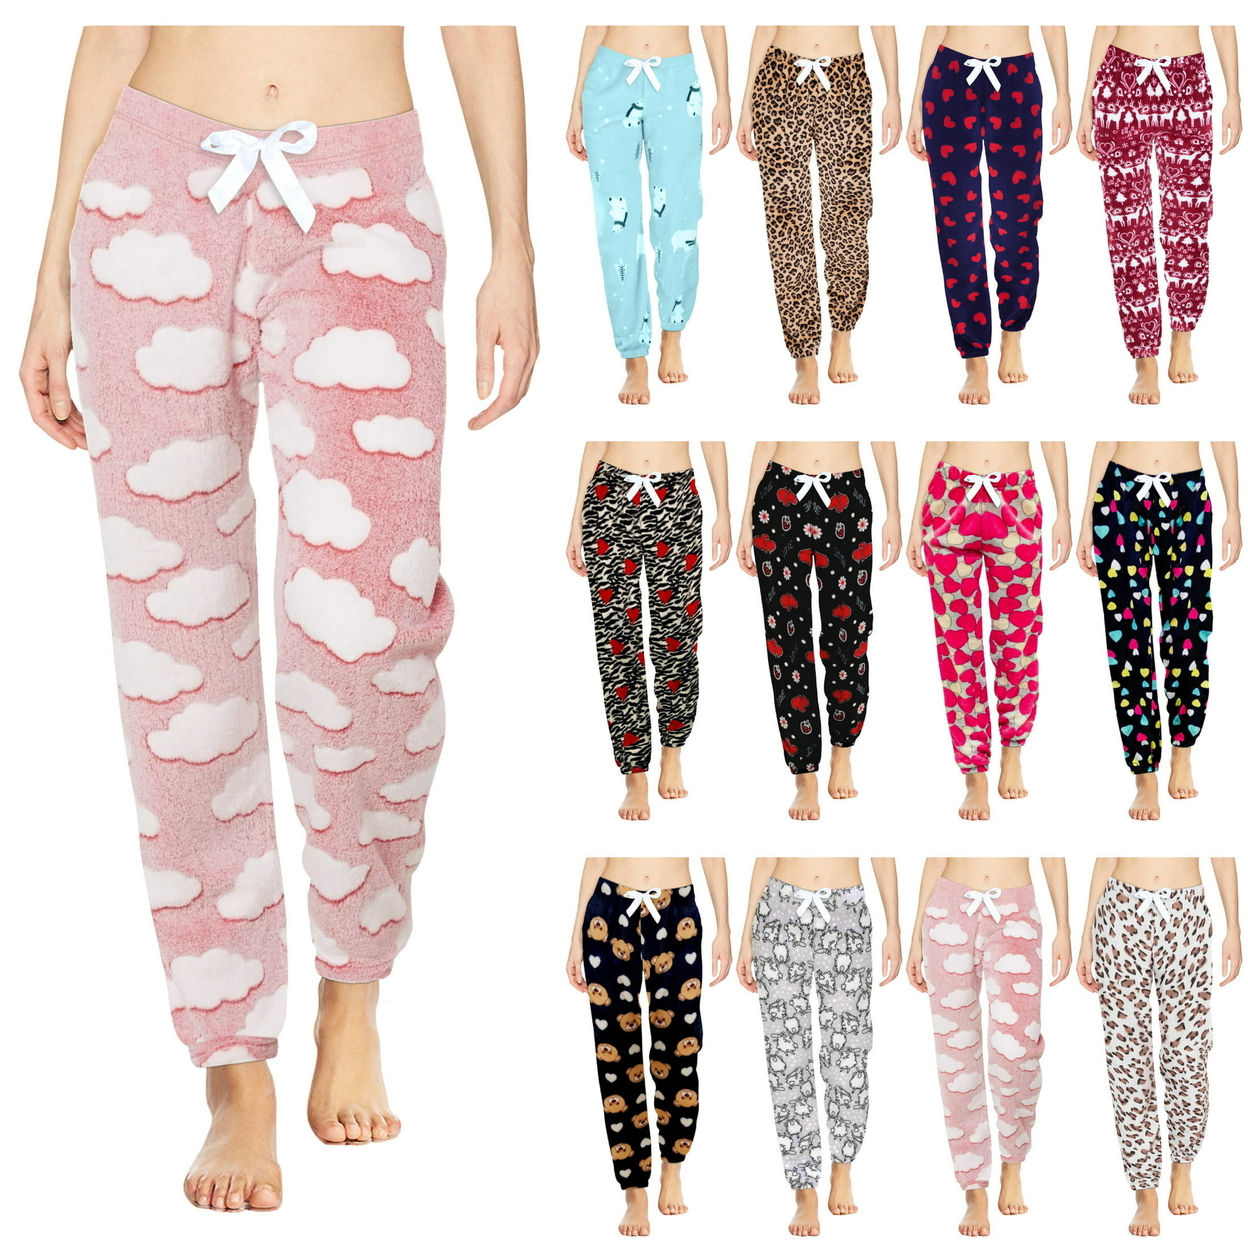 3-Pack: Women's Solid & Printed Ultra-Soft Comfy Stretch Micro-Fleece Pajama Lounge Pants - Xx-large, Animal